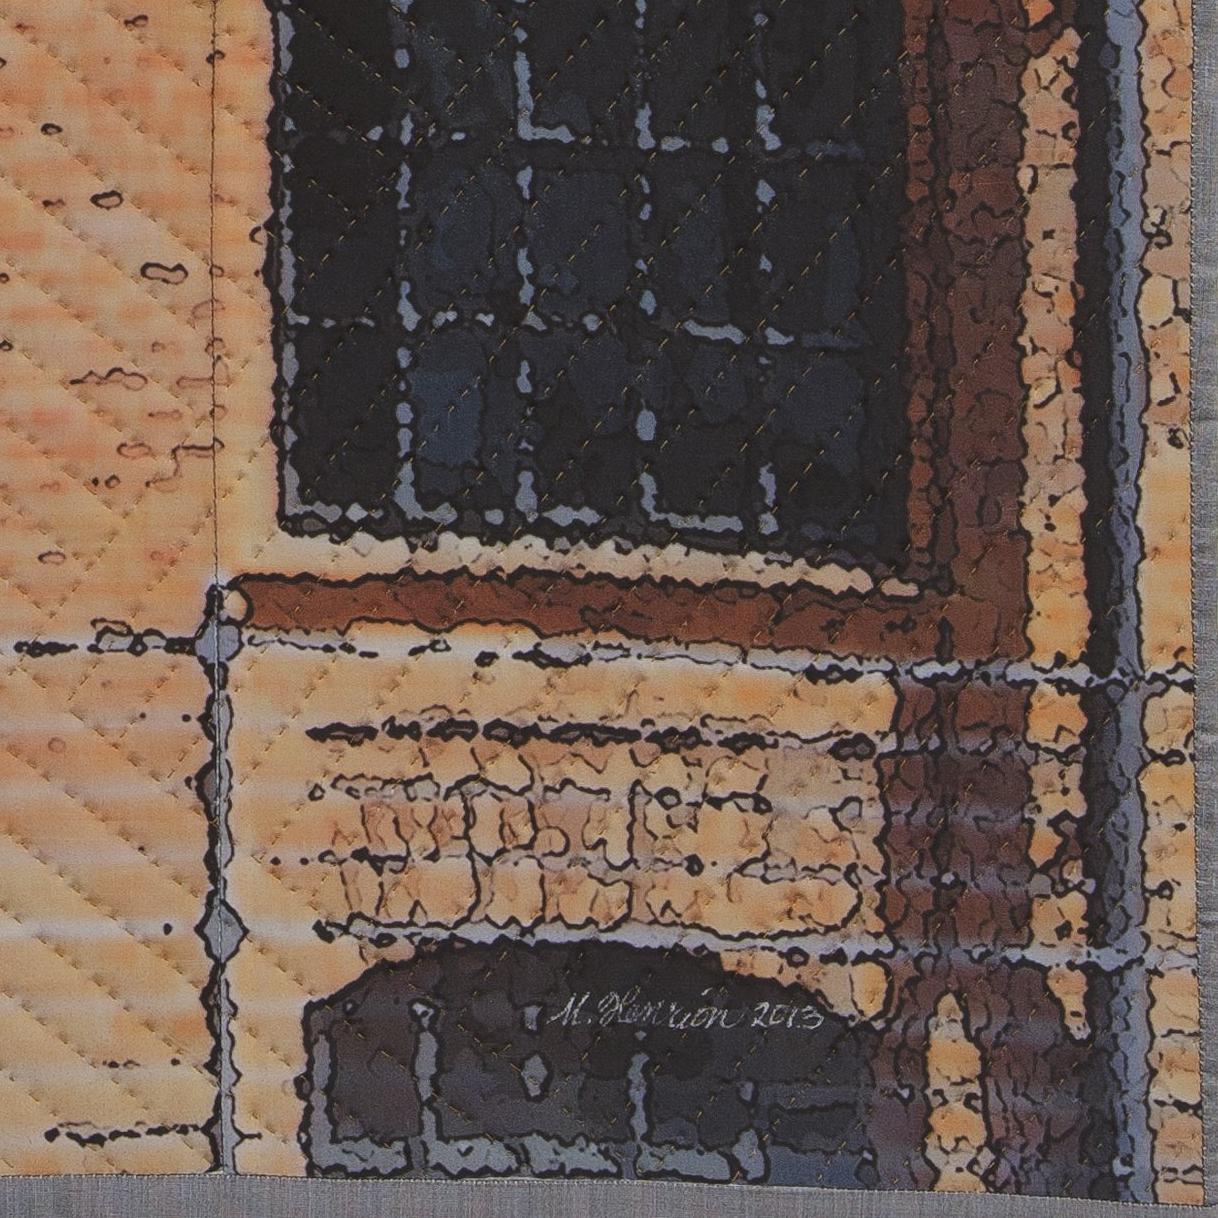 Lodz Windows 1313, Mixed Media on Canvas - Contemporary Mixed Media Art by Marilyn Henrion